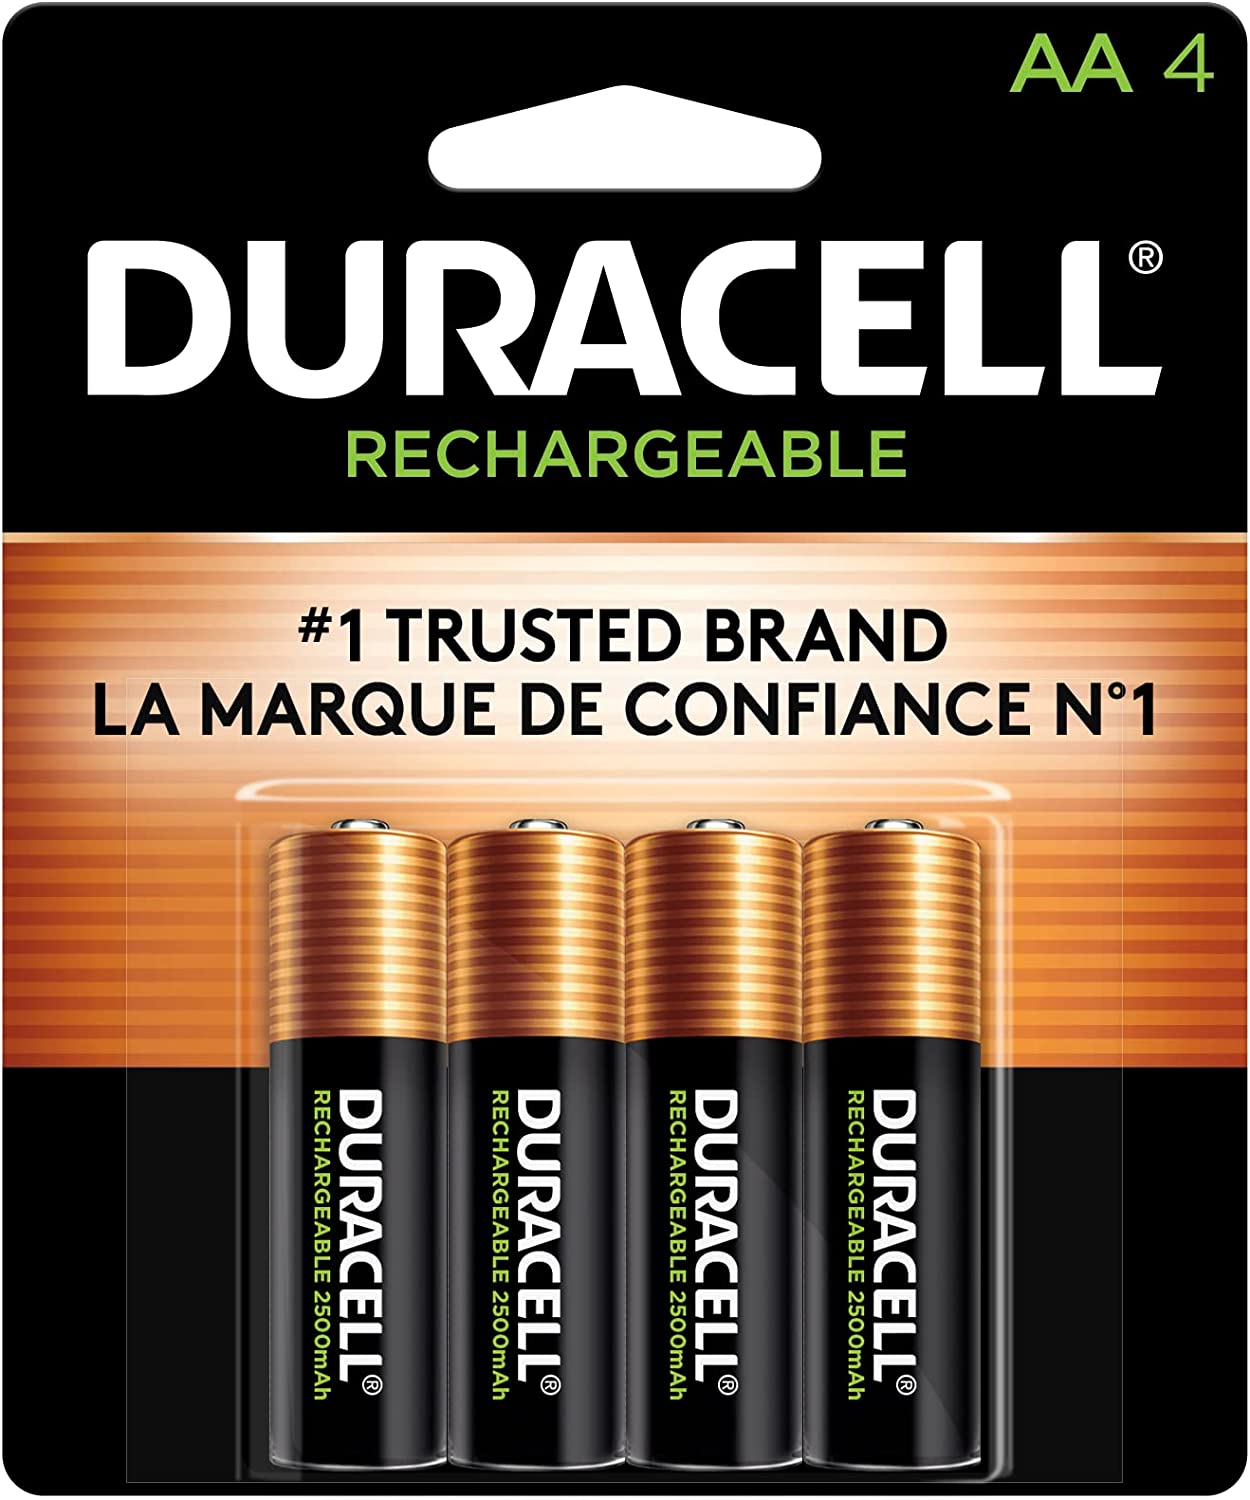 Duracell Rechargeable AA Batteries, 4 Count Pack, [...]